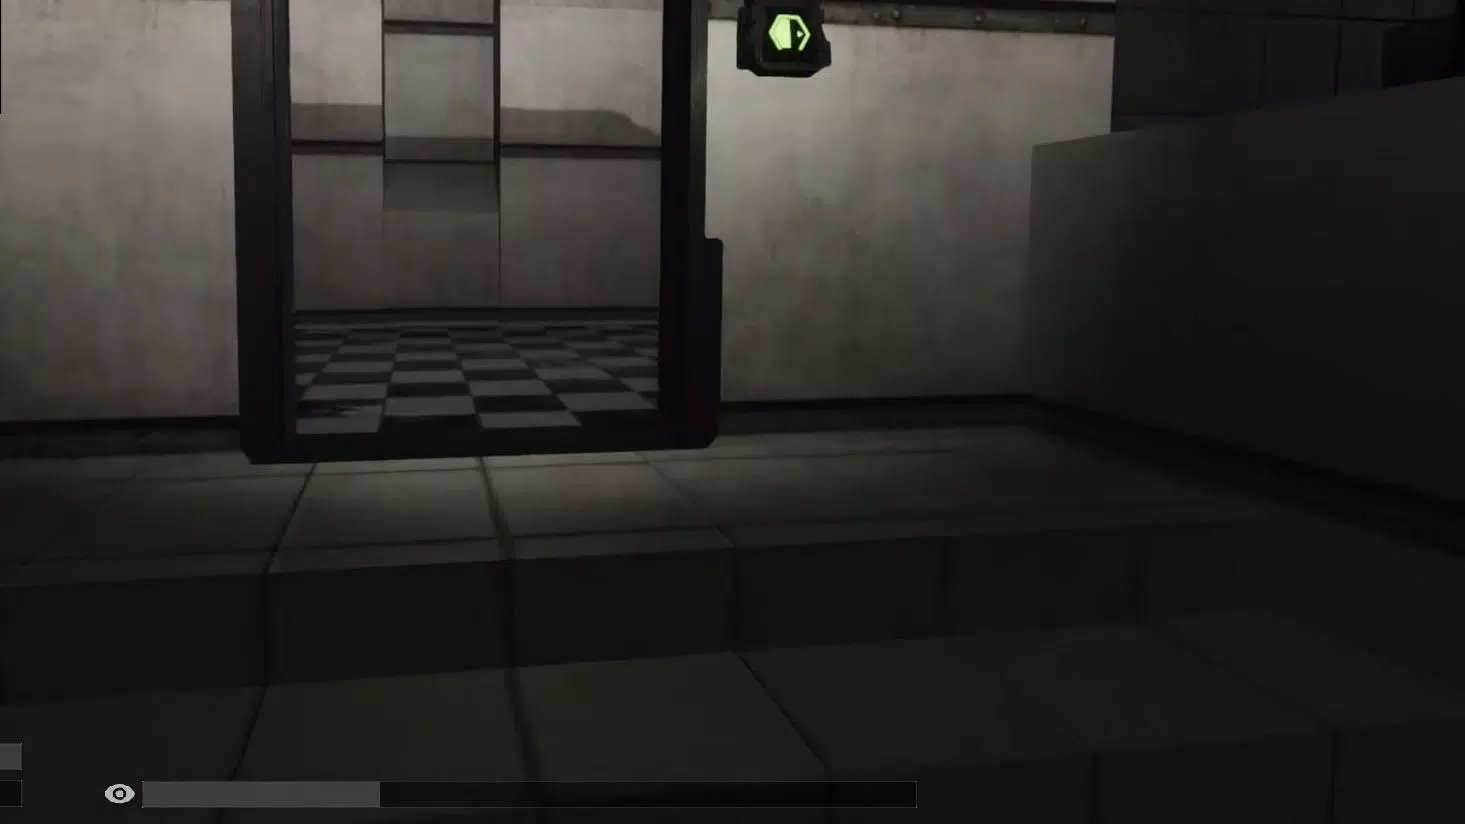 scp unity remake download android - Colaboratory